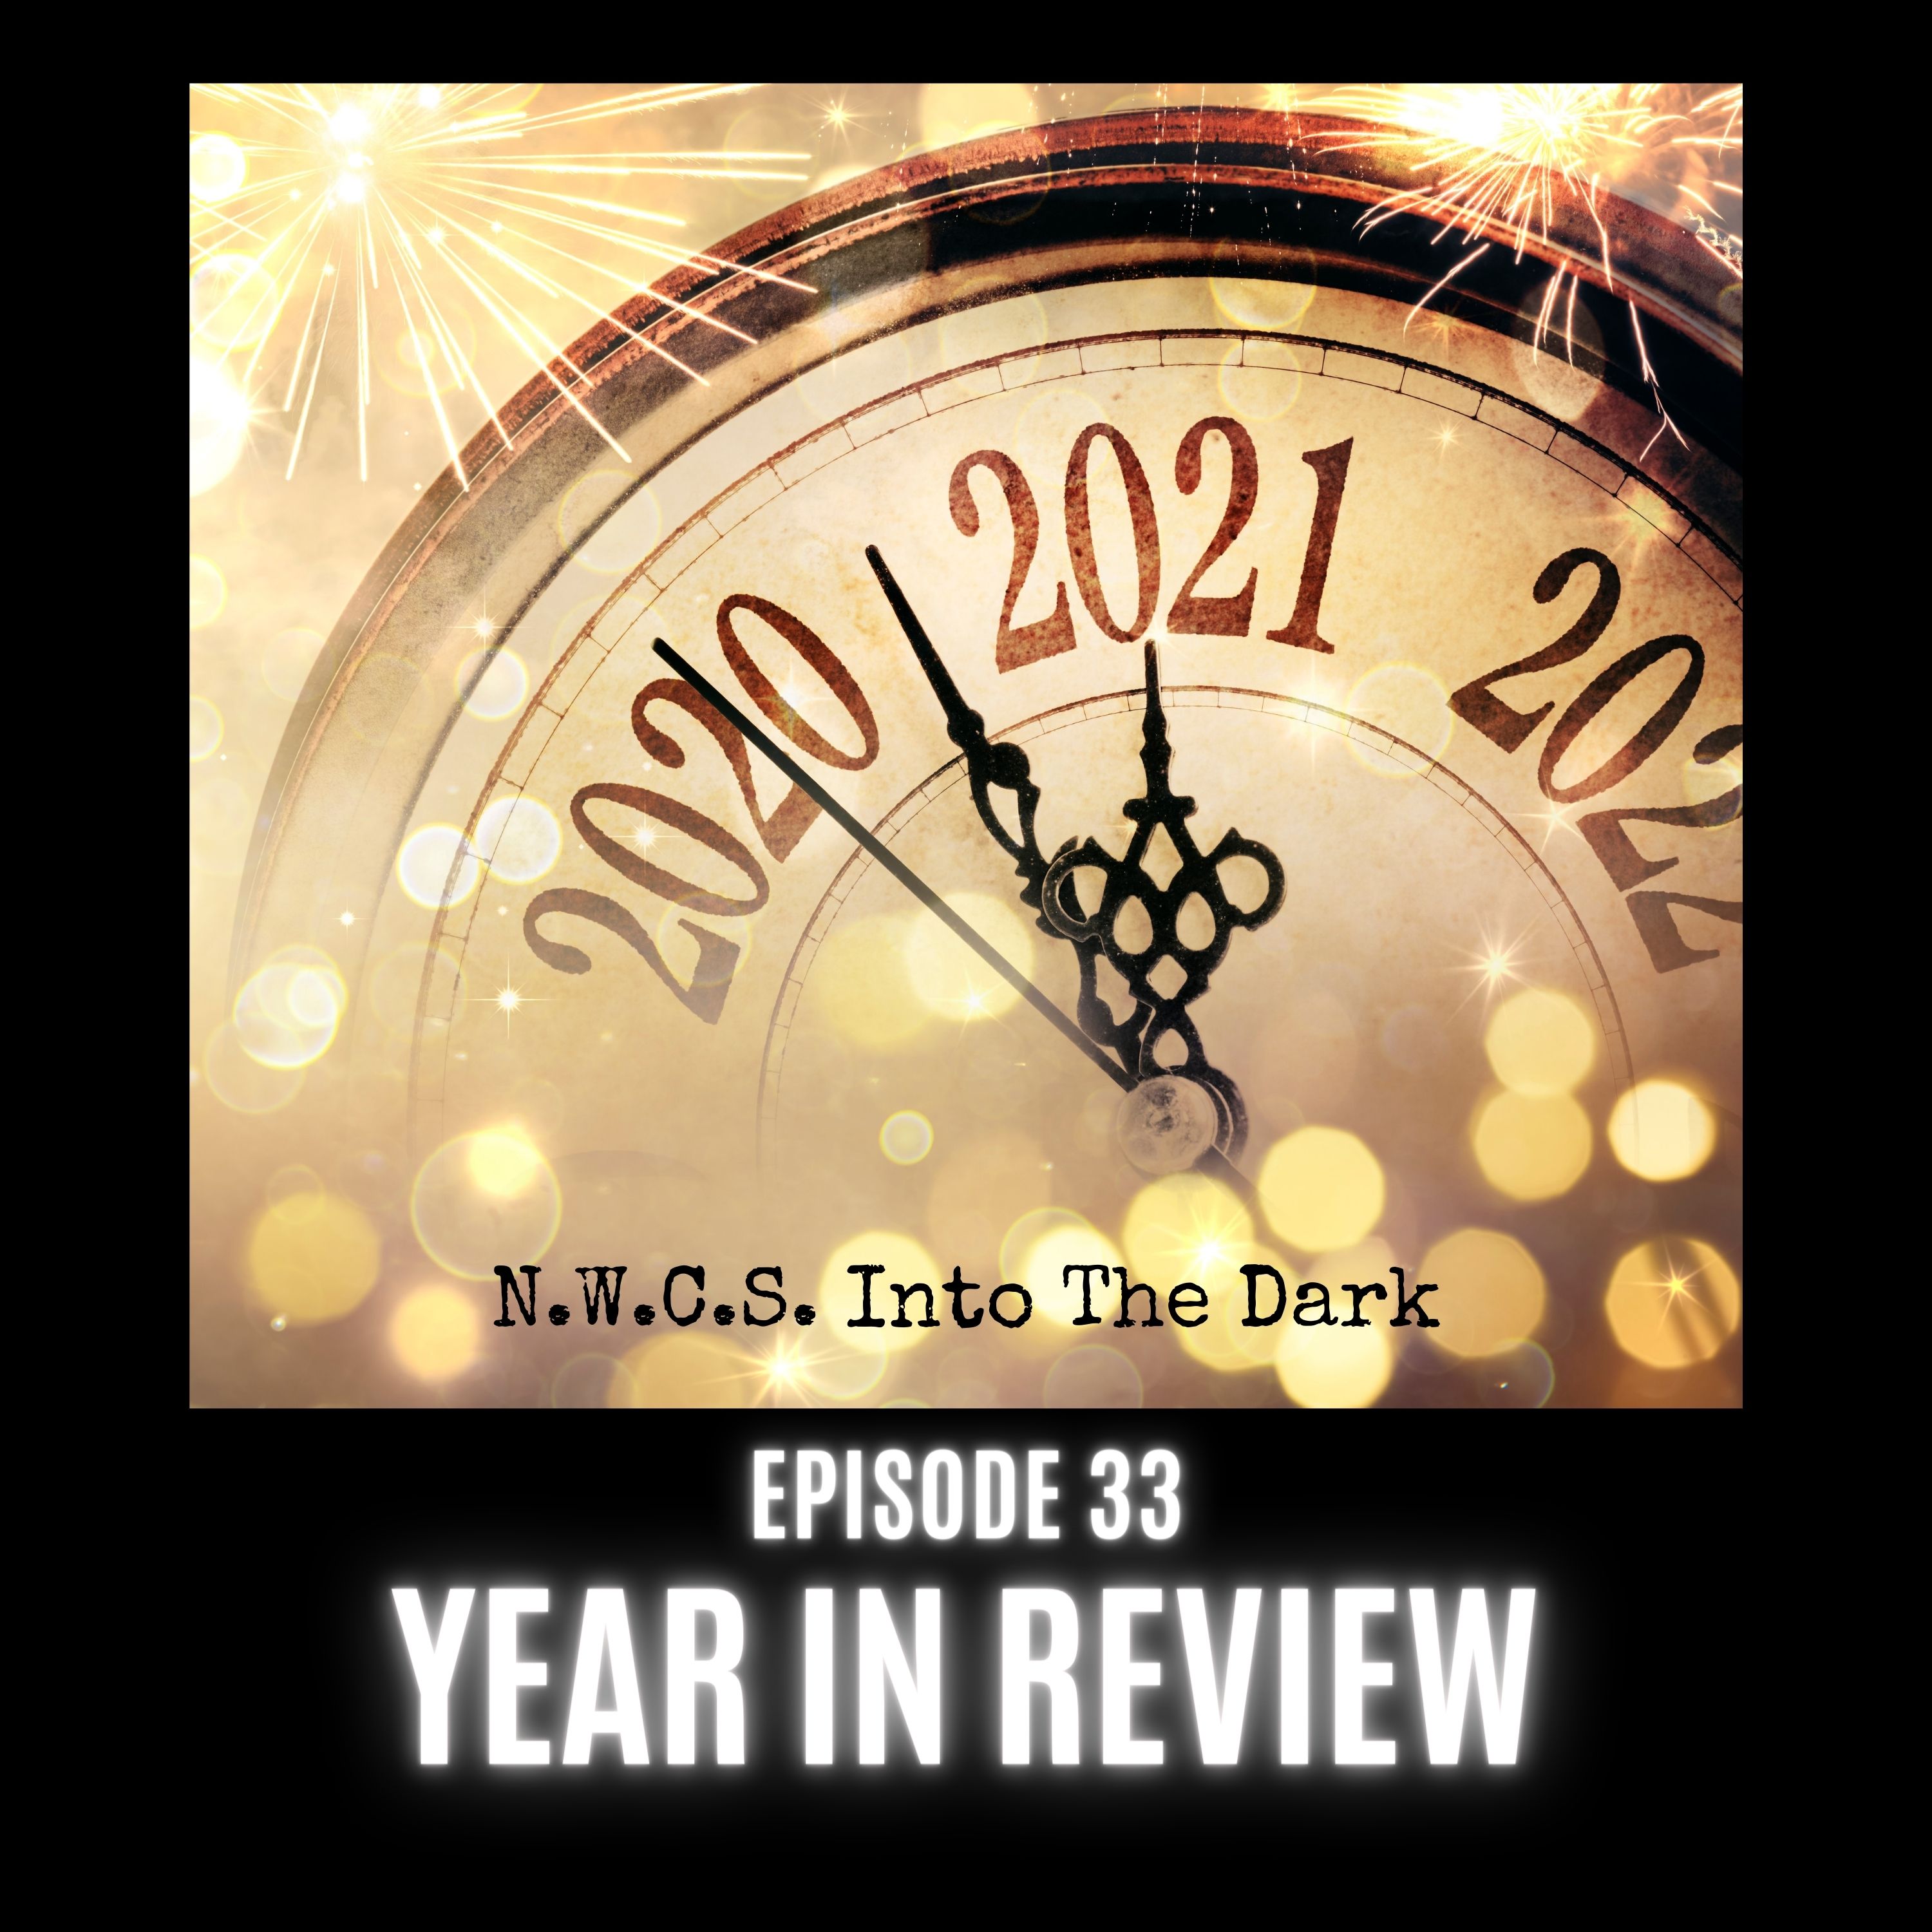 NWCS Into The Dark - Episode 33 Year In Review